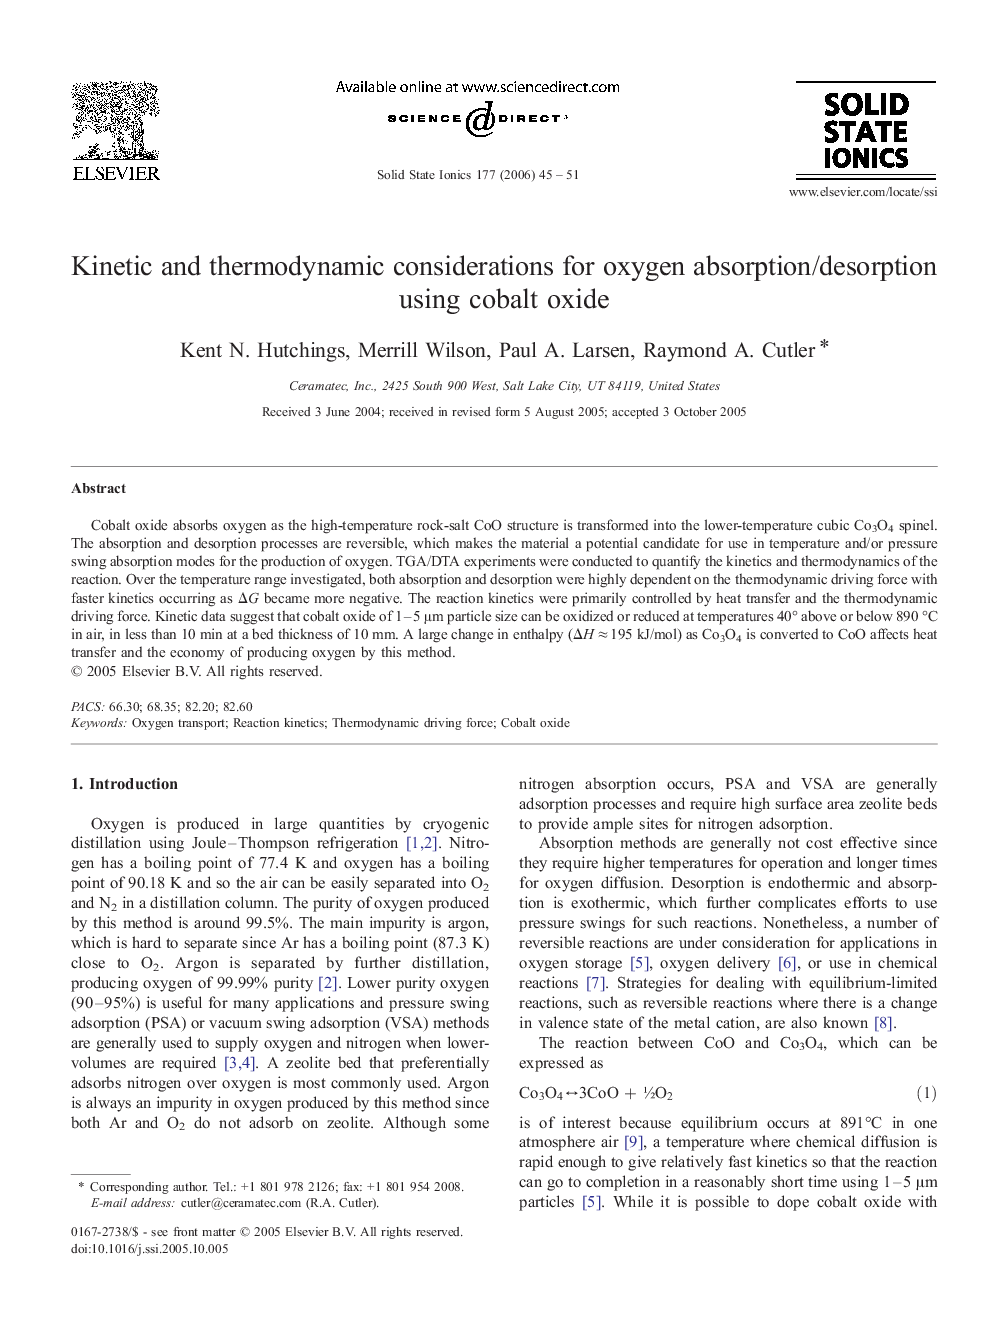 Kinetic and thermodynamic considerations for oxygen absorption/desorption using cobalt oxide